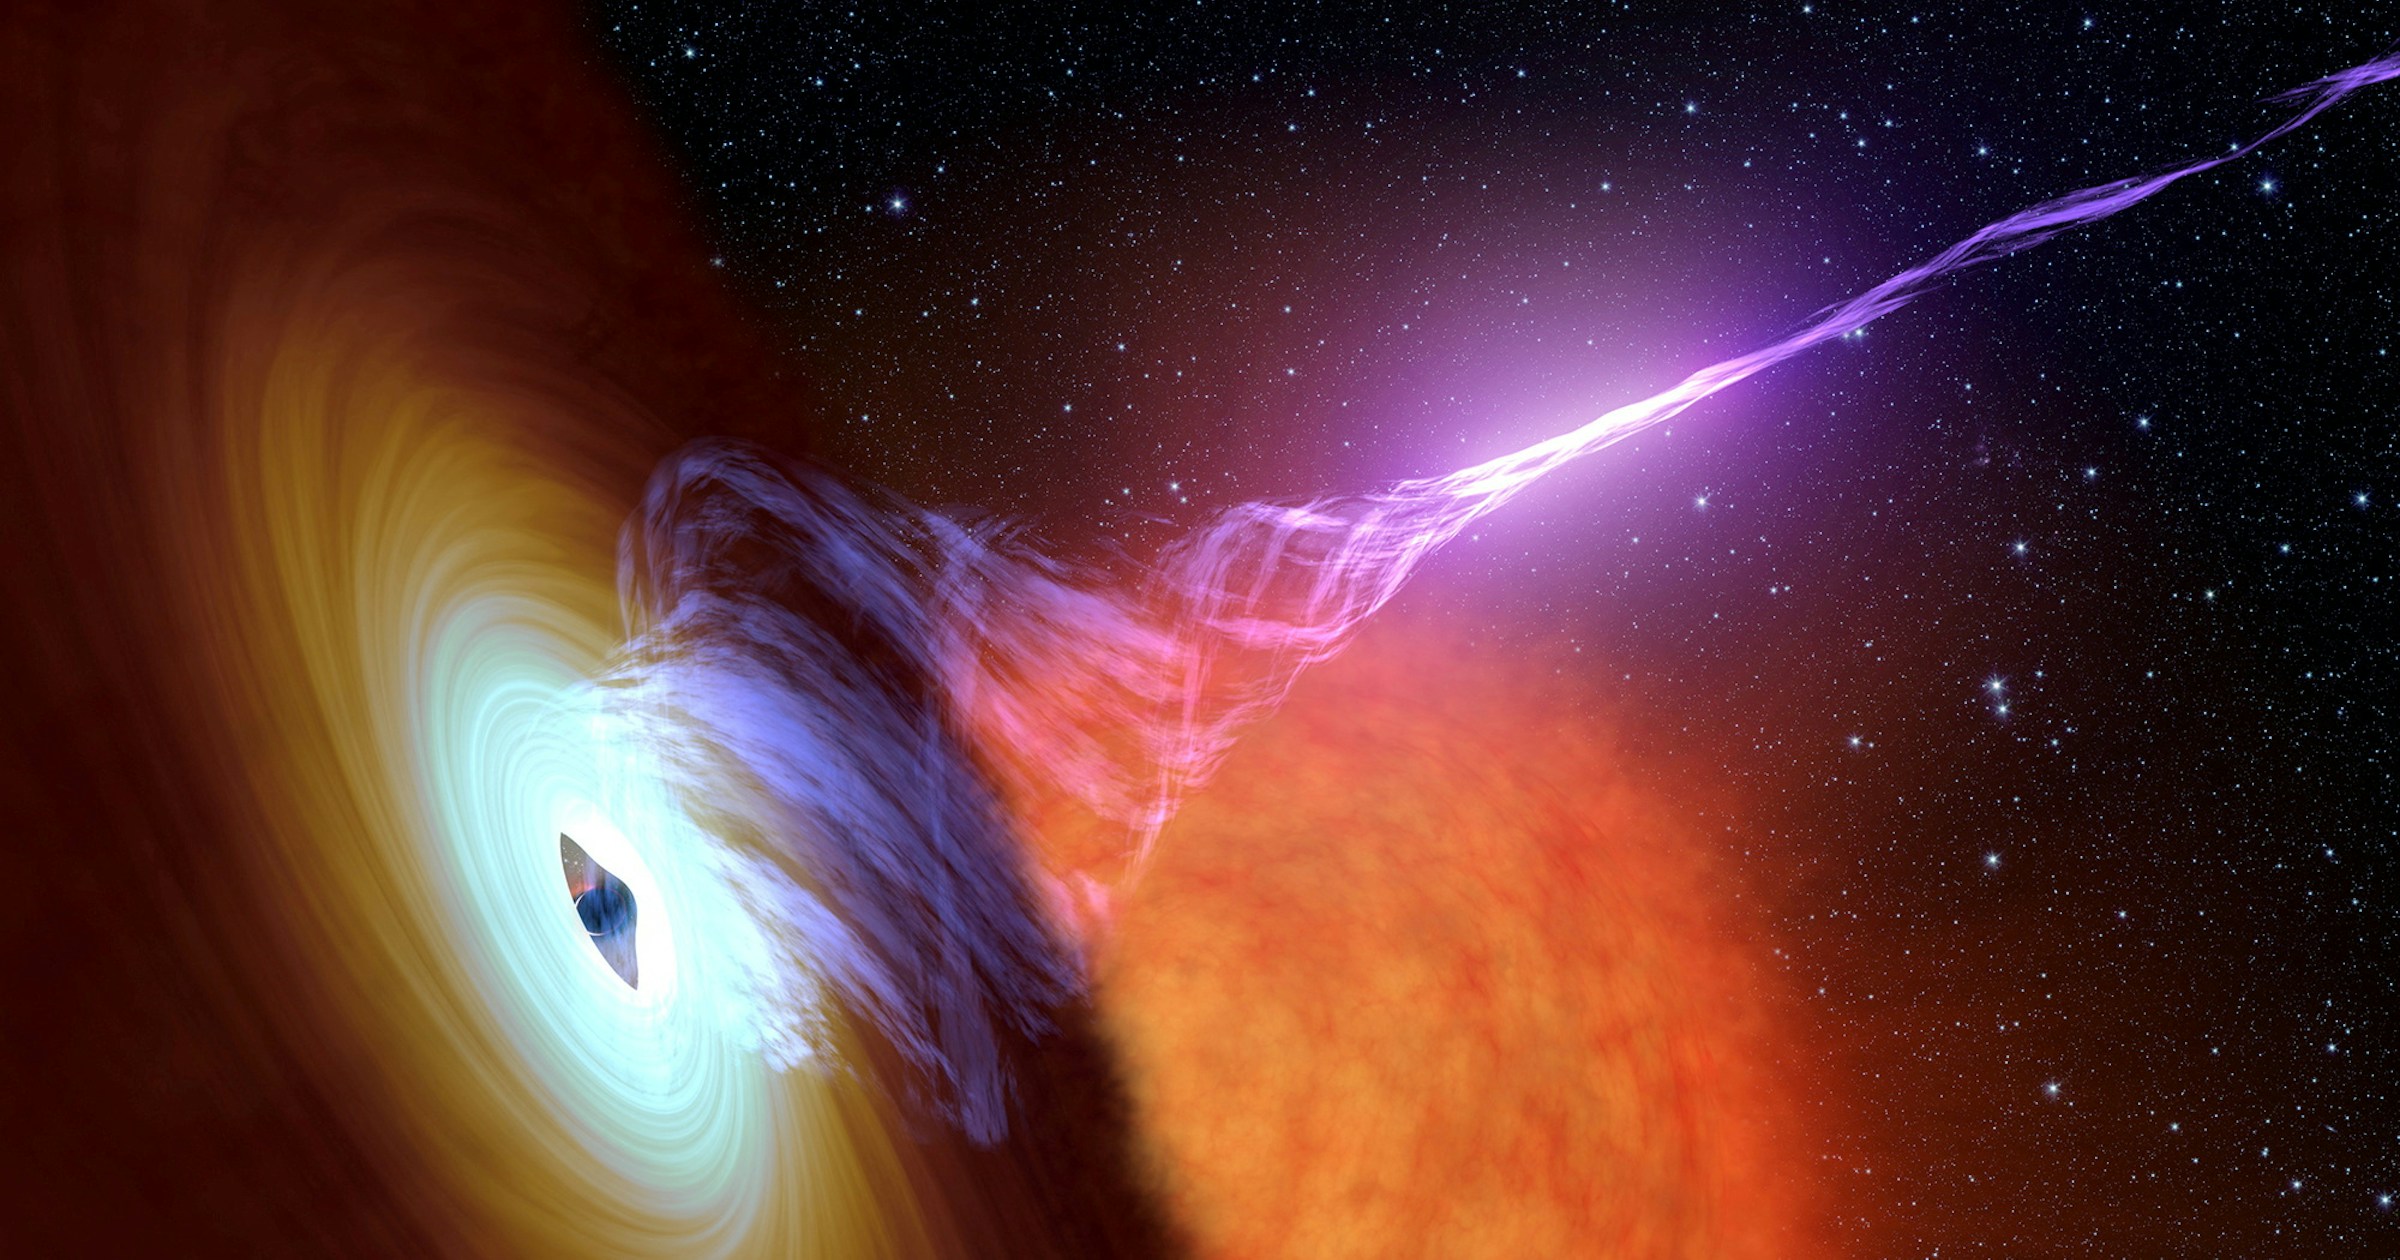 Physicists succeed in simulating a small “black hole”.